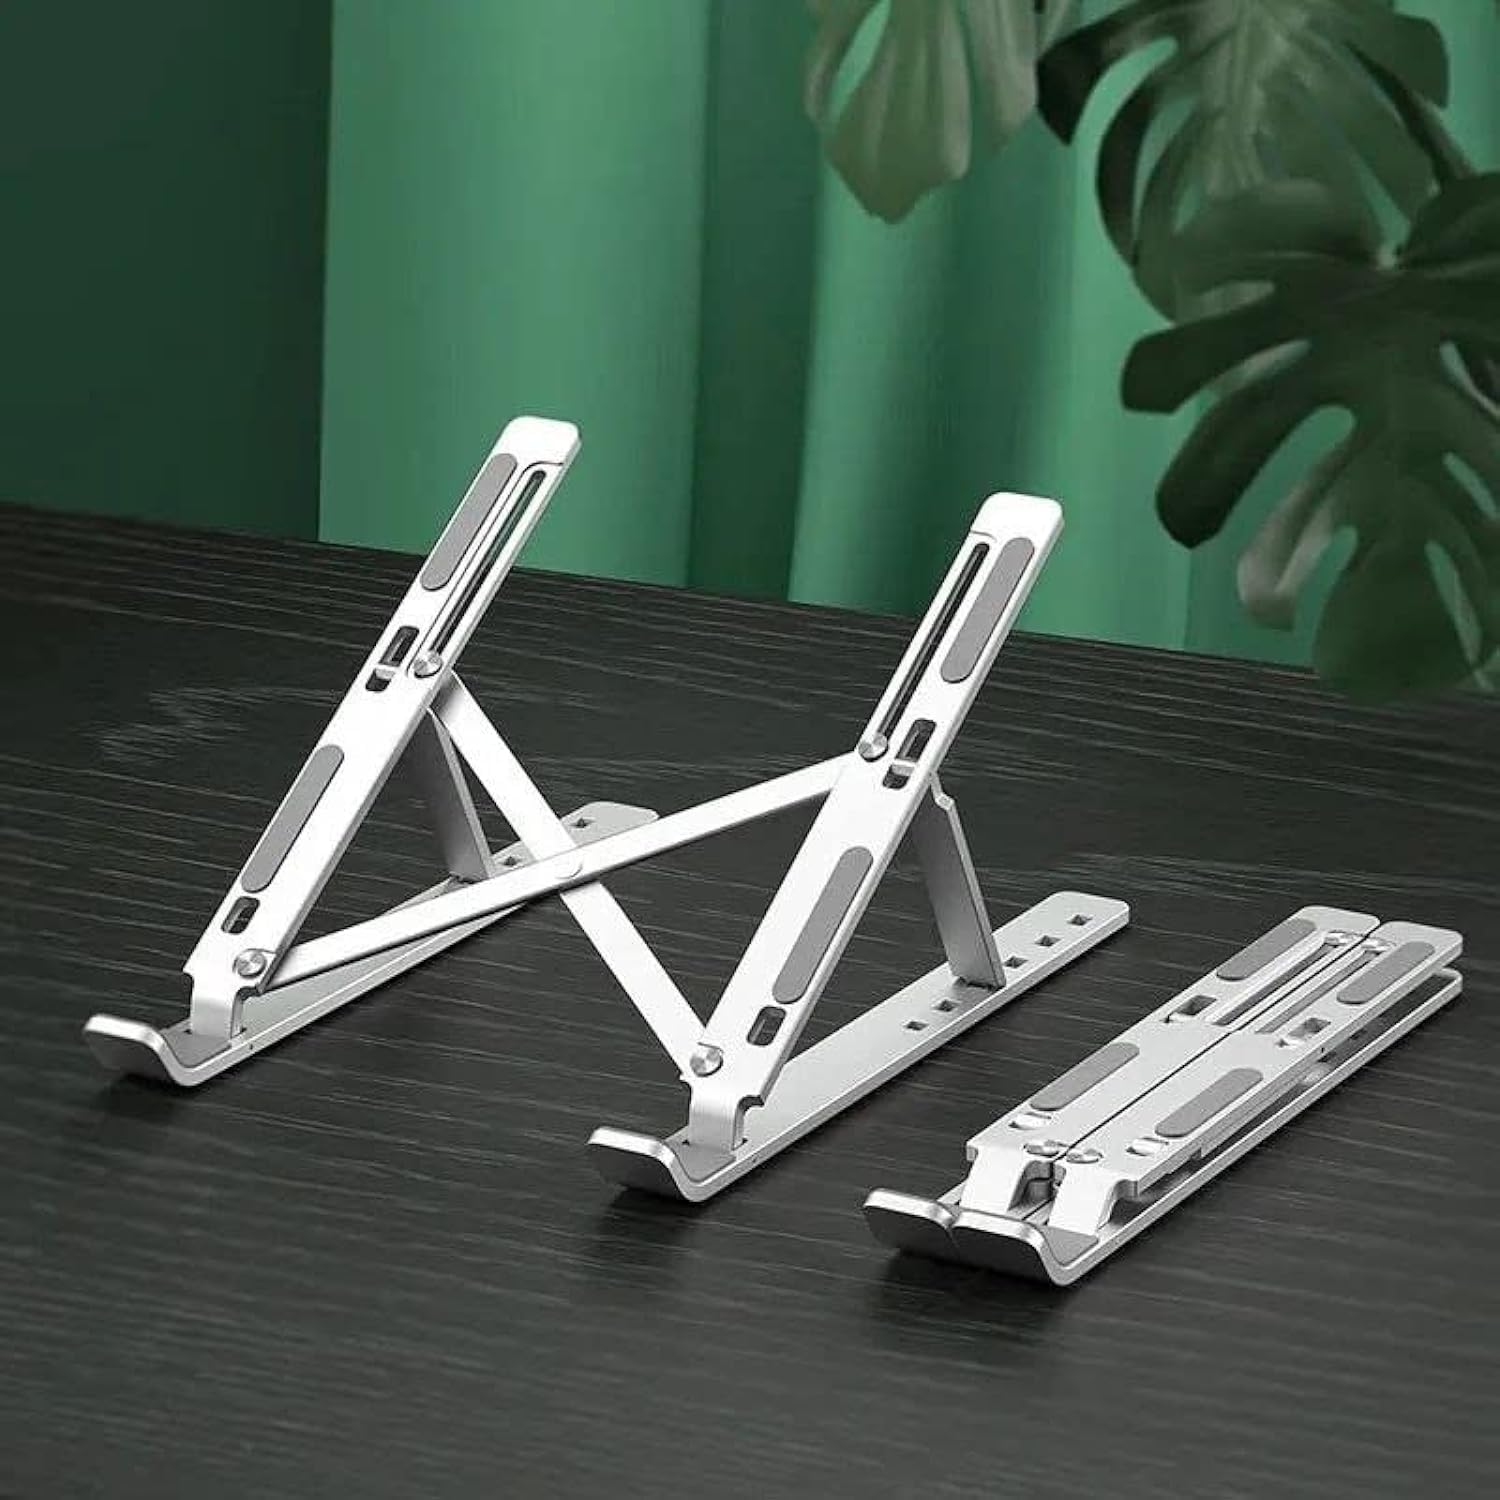 Portable Foldable Laptop Stand